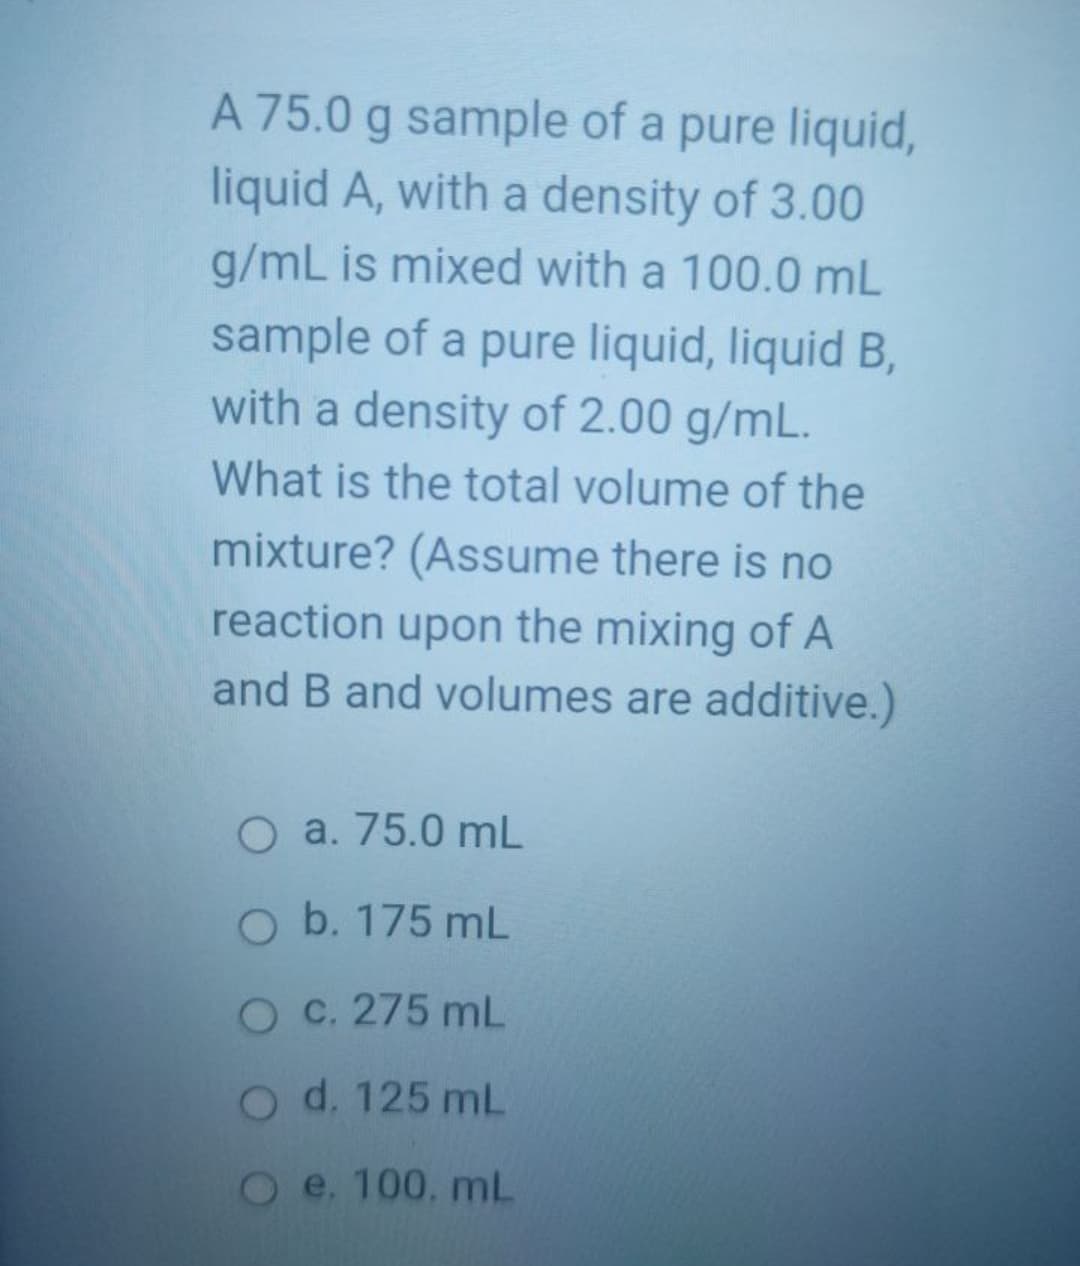 A 75.0 g sample of a pure liquid,
liquid A, with a density of 3.00
g/mL is mixed with a 100.0 mL
sample of a pure liquid, liquid B,
with a density of 2.00 g/mL.
What is the total volume of the
mixture? (Assume there is no
reaction upon the mixing of A
and B and volumes are additive.)
O a. 75.0 mL
O b. 175 mL
O C. 275 mL
Od. 125 mL
Oe. 100, mL
